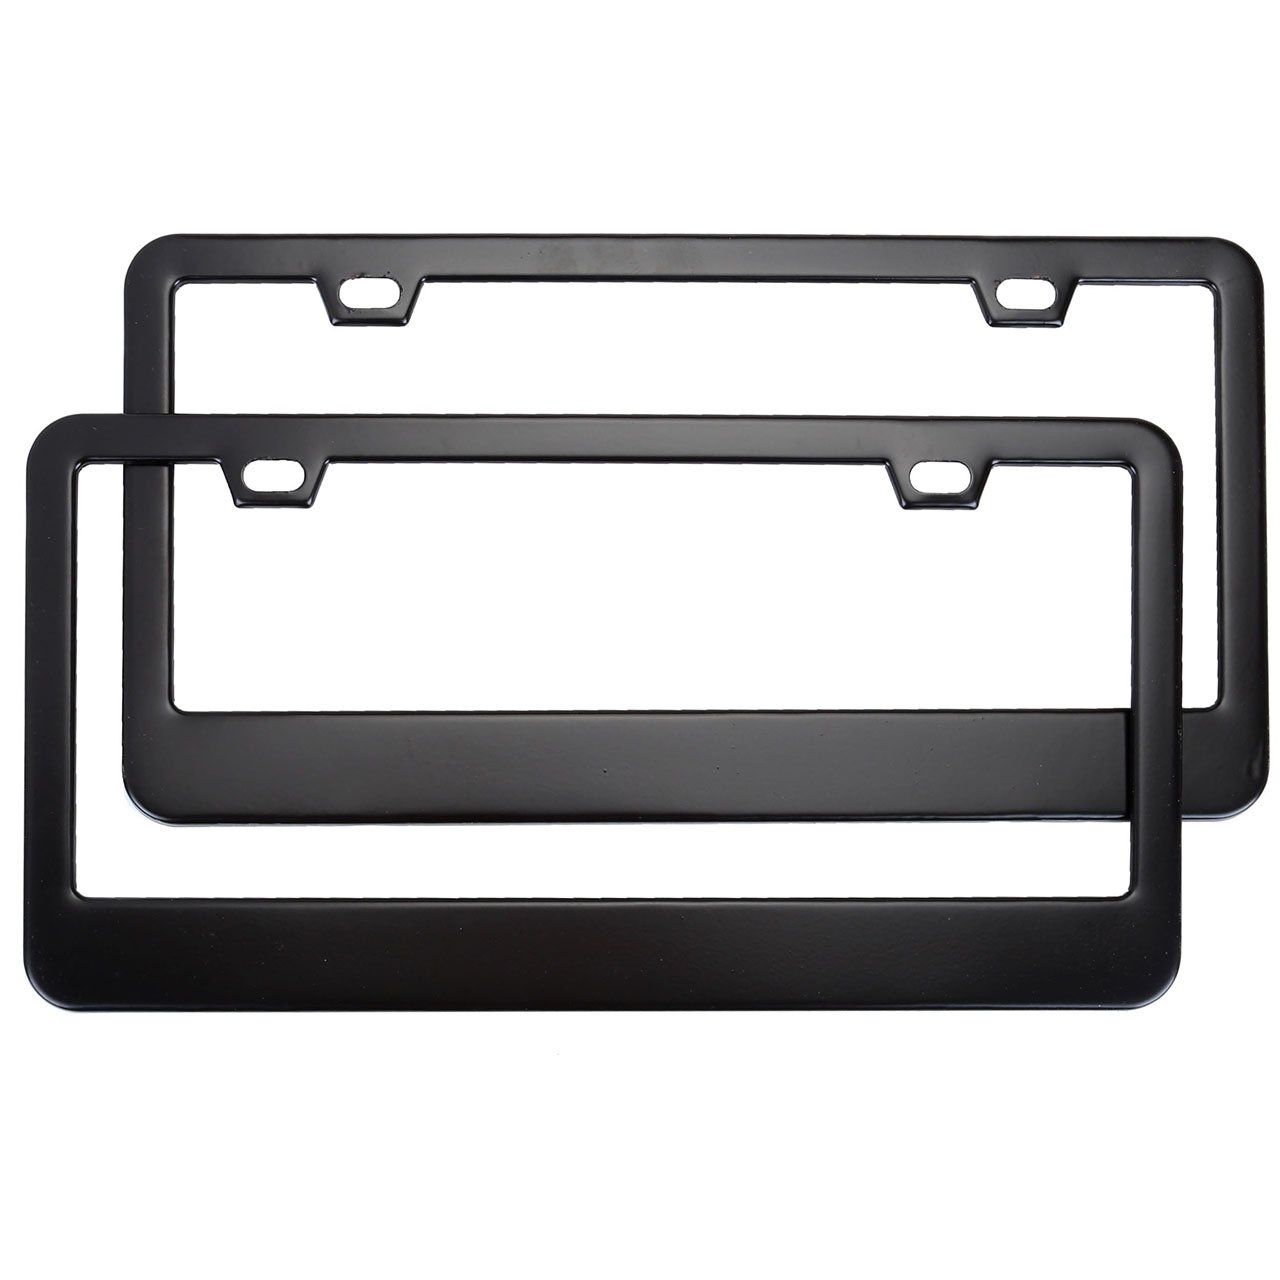 ACBungji Car Stainless Steel Black Front Rear License Plate Frame Set 2-Hole (pack of 2)